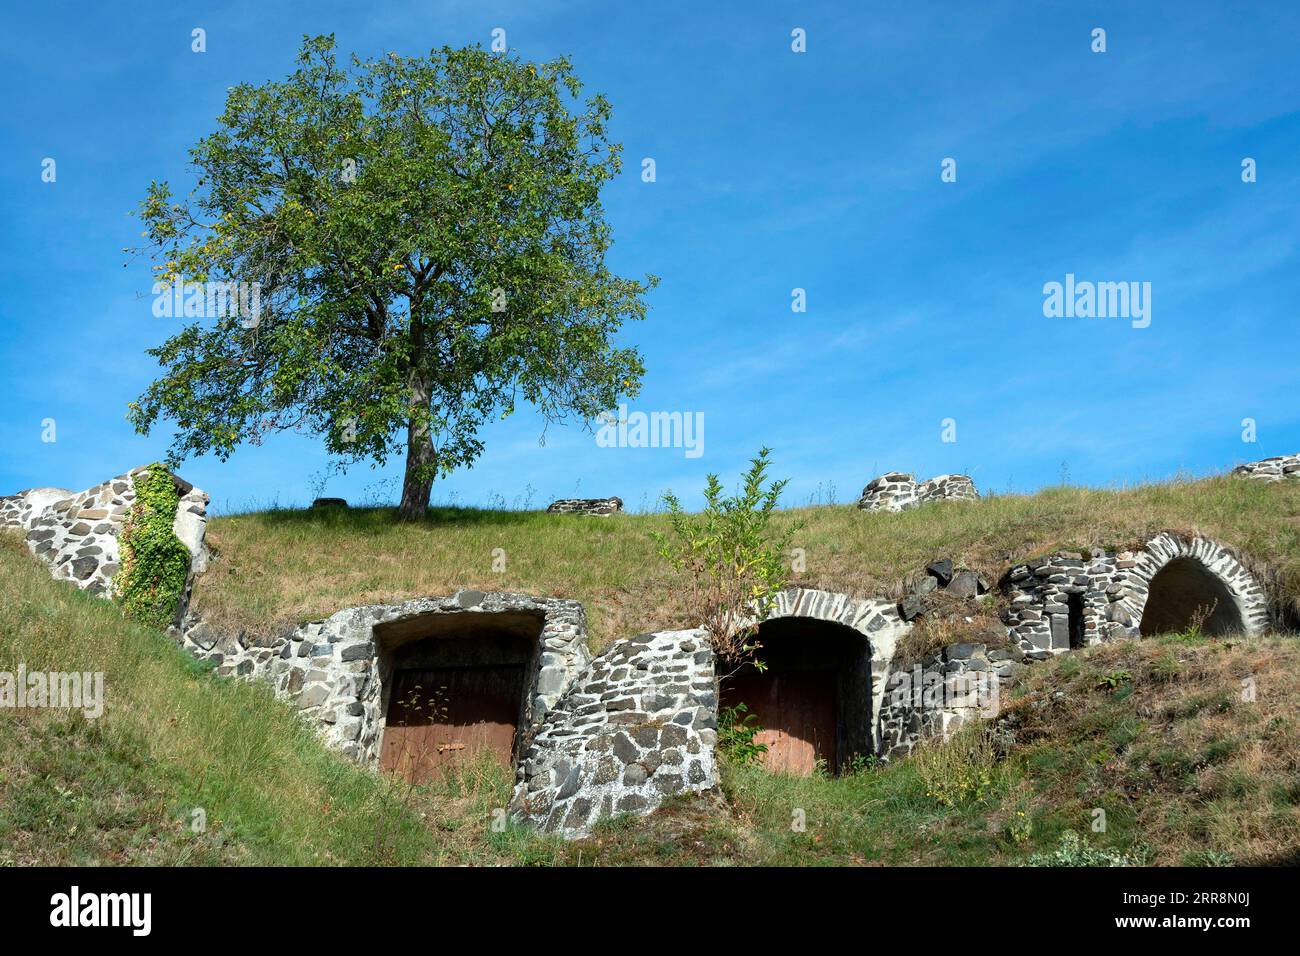 Chateaugay. Wine cellars carved out of the rock. Puy de Dome department. Auvergne Rhone Alpes. France Stock Photo